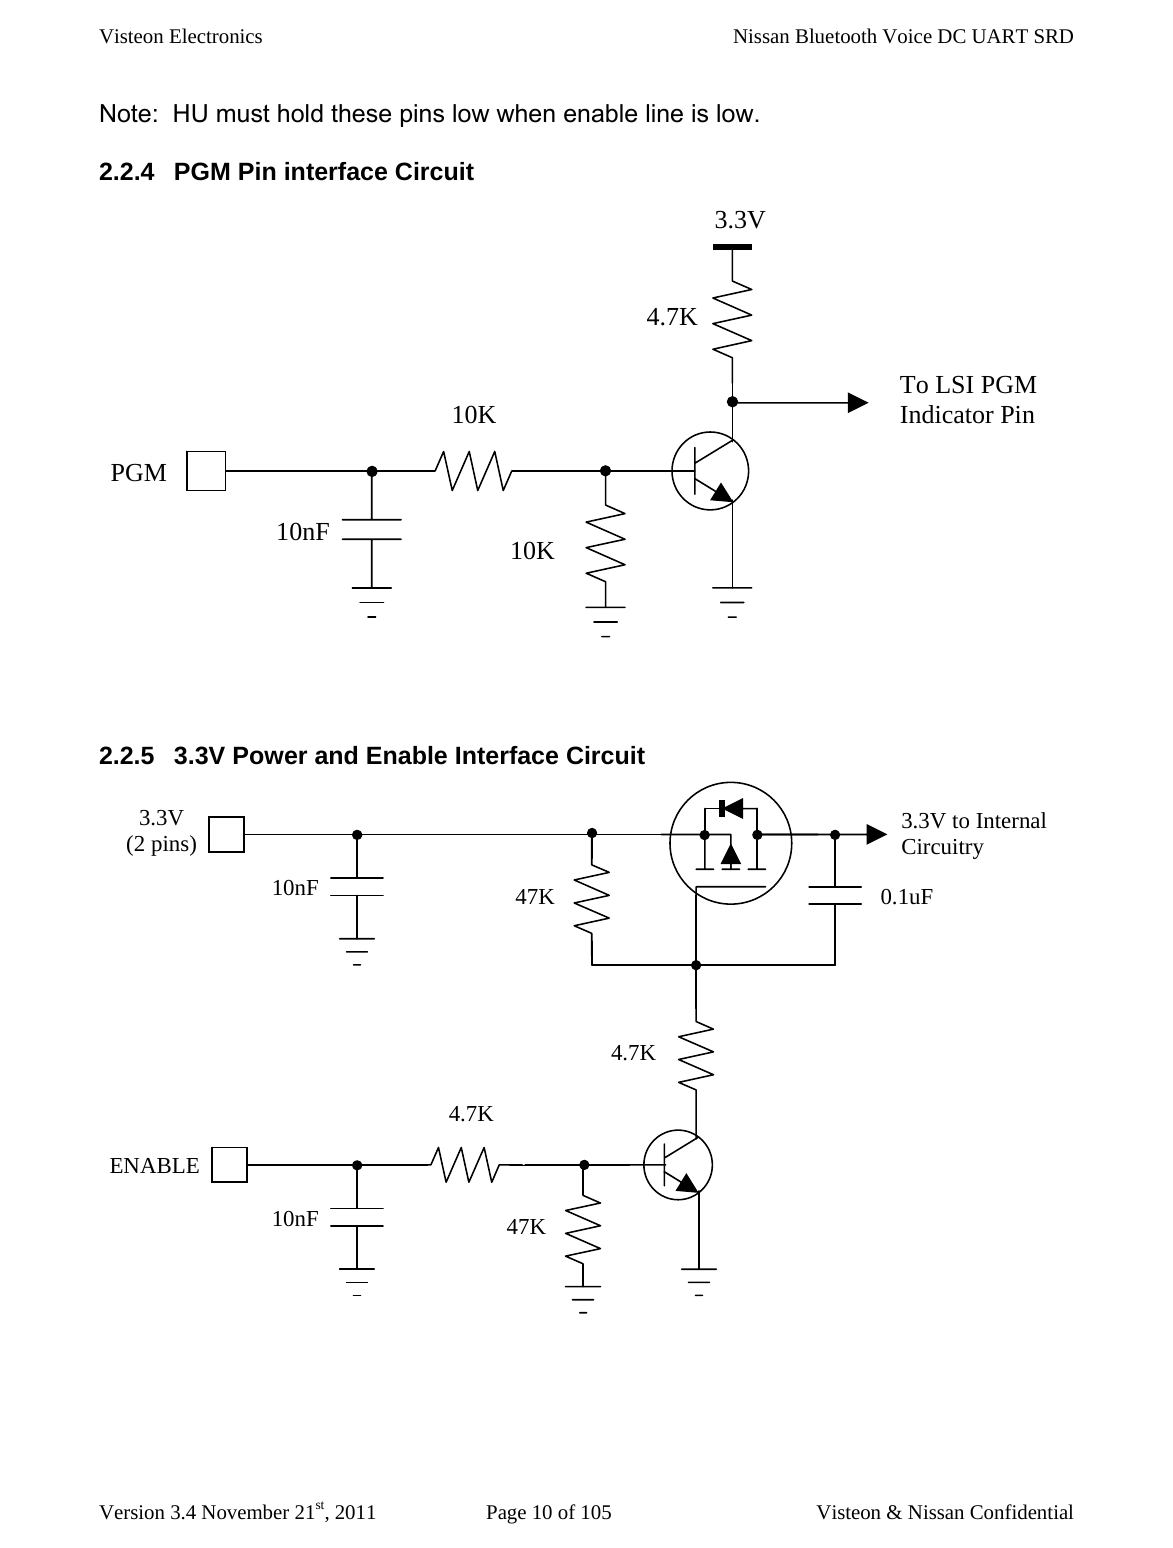 Visteon Electronics    Nissan Bluetooth Voice DC UART SRD  Version 3.4 November 21st, 2011  Page 10 of 105  Visteon &amp; Nissan Confidential Note:  HU must hold these pins low when enable line is low.   2.2.4  PGM Pin interface Circuit   2.2.5  3.3V Power and Enable Interface Circuit   3.3V PGM 10K 10K 10nF To LSI PGM Indicator Pin 4.7K 3.3V (2 pins) ENABLE 47K 4.7K 3.3V to Internal Circuitry 4.7K 47K 10nF 10nF 0.1uF 